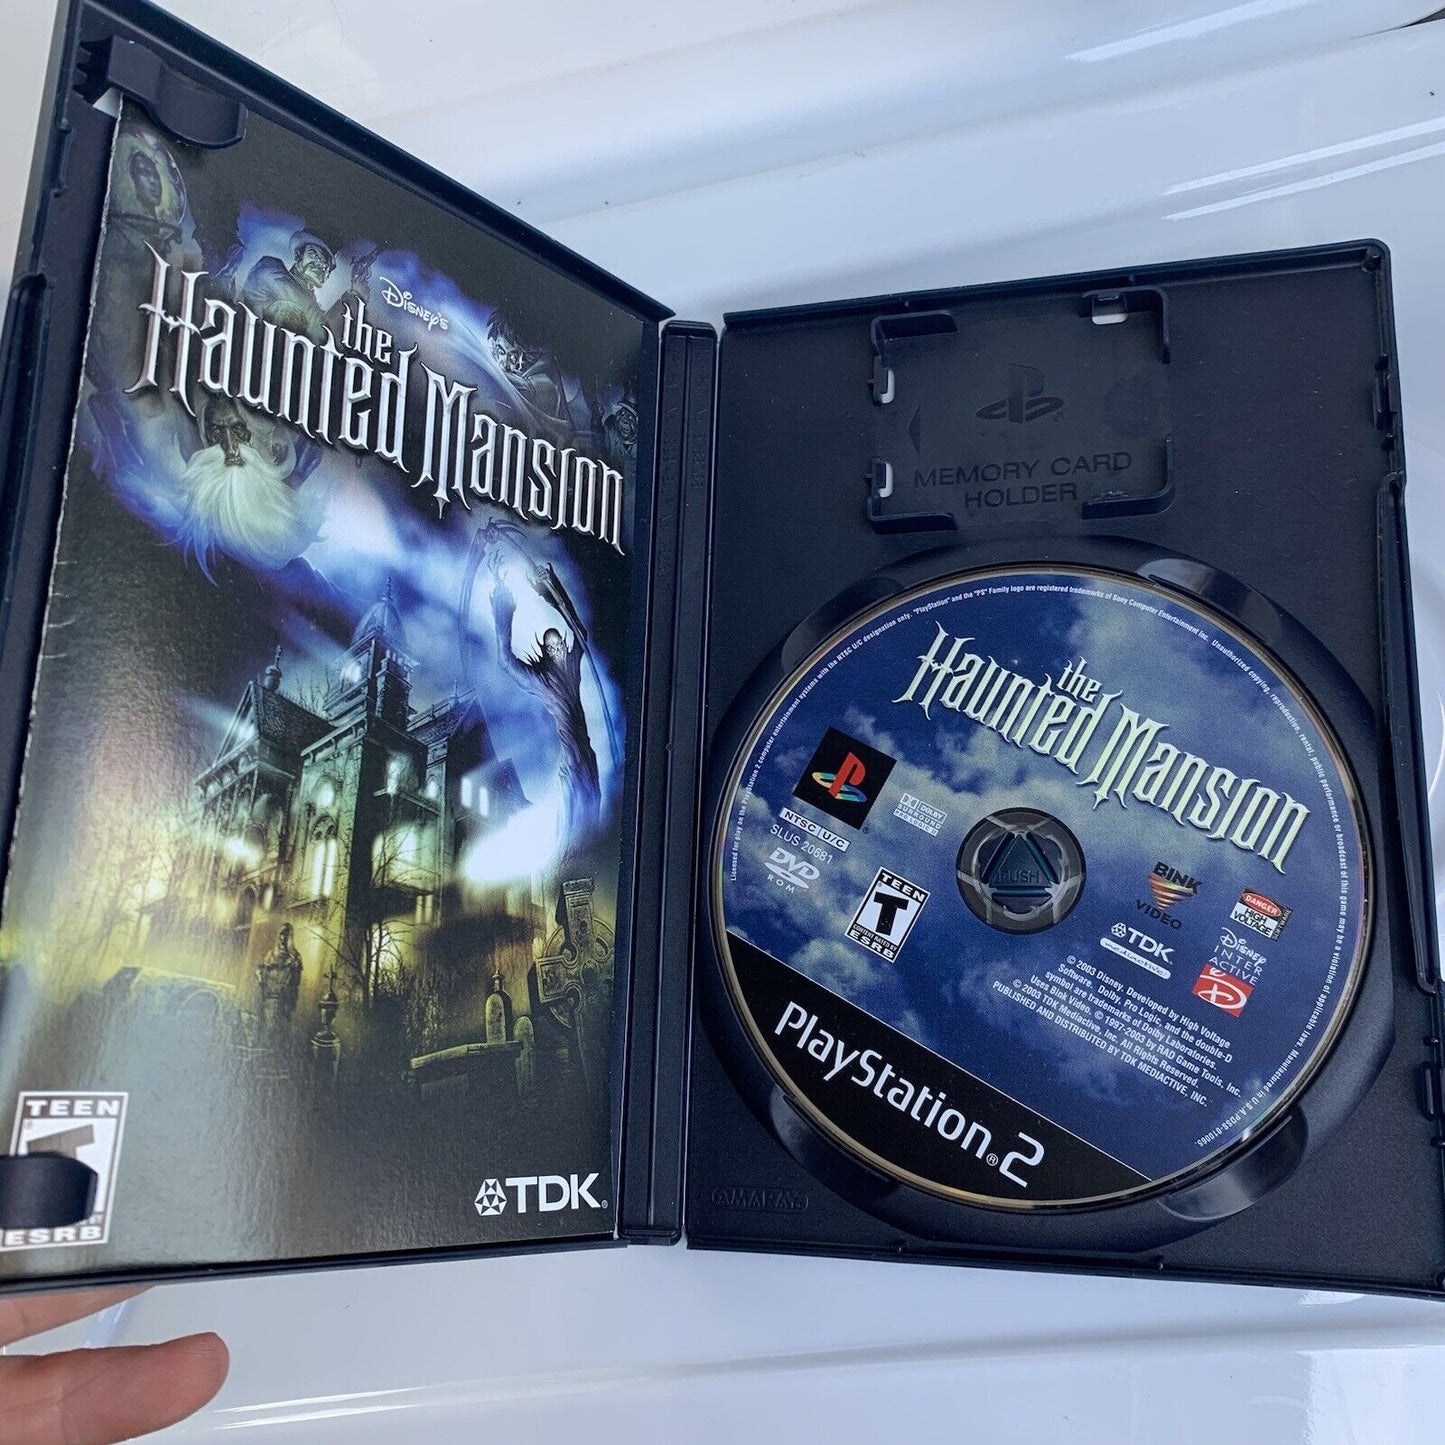 Disney's The Haunted Mansion for Sony PlayStation 2 (PS2) - complete